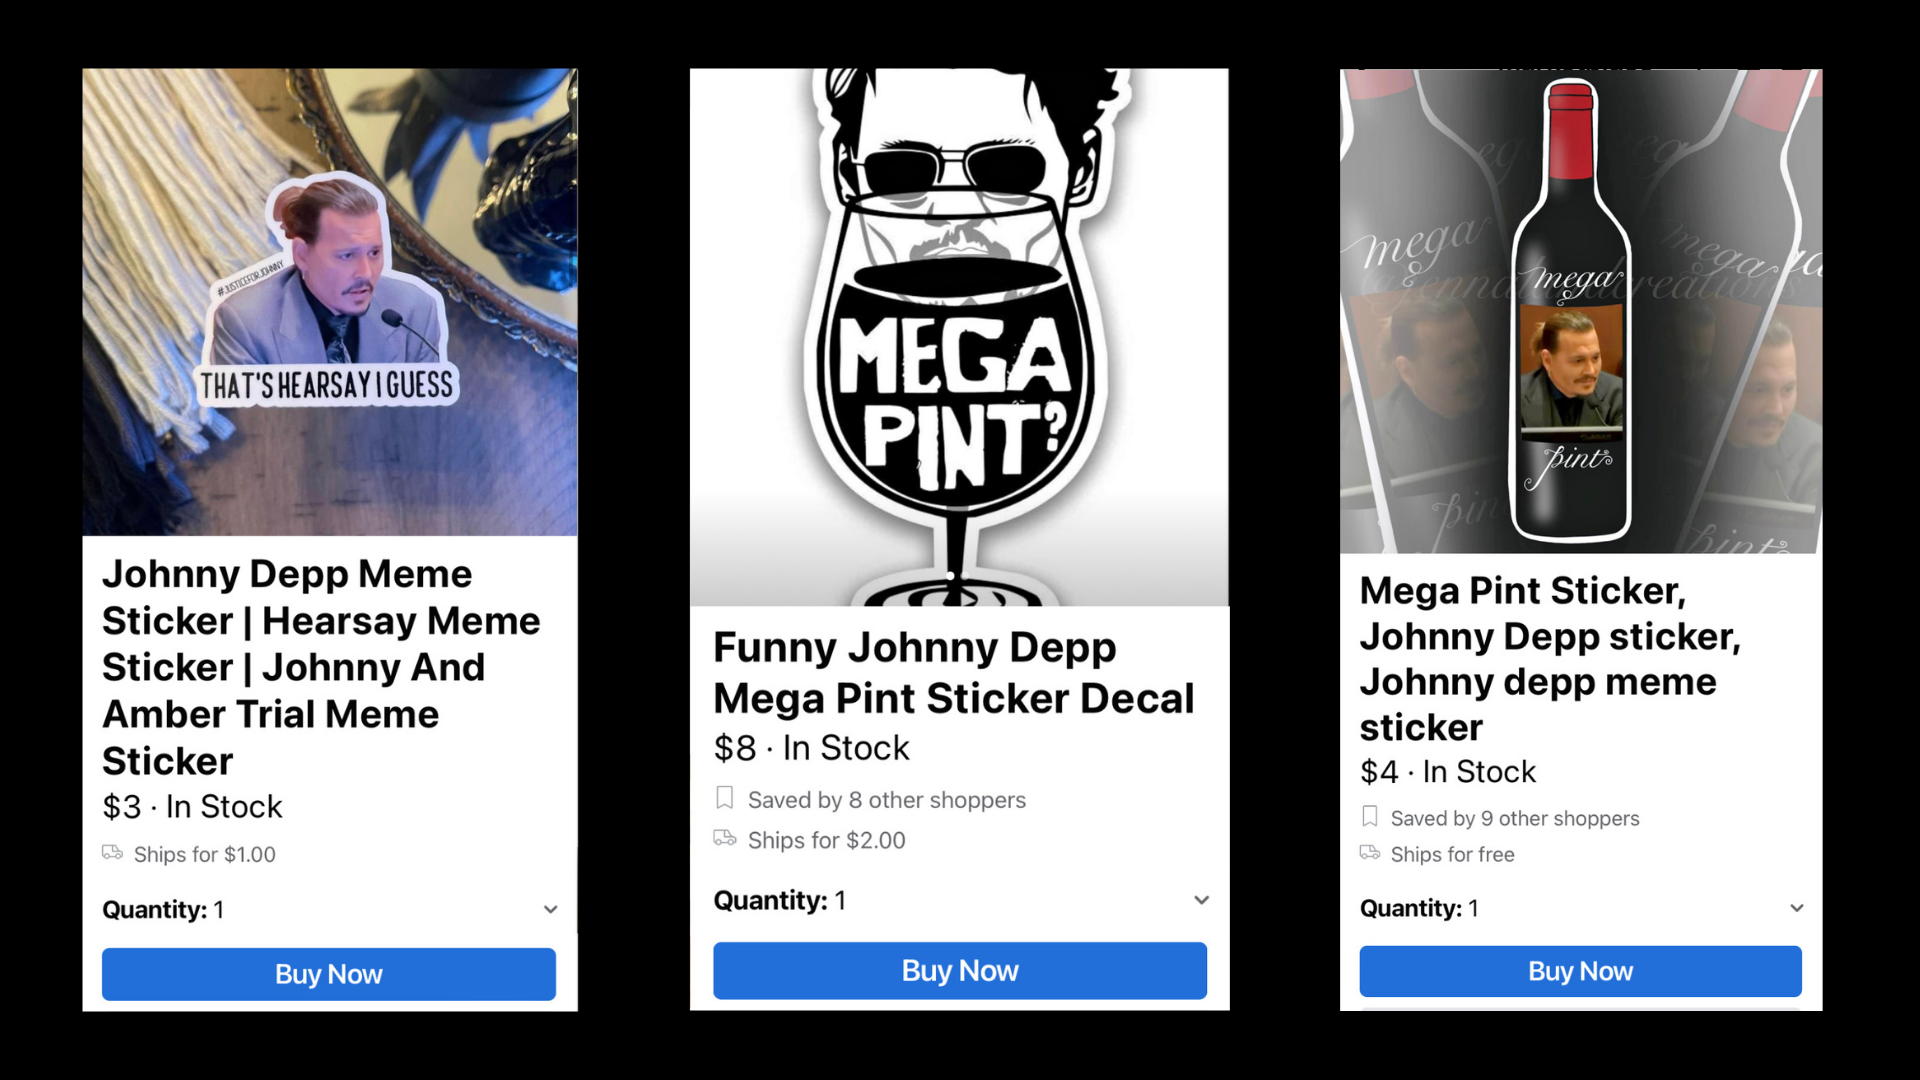 A set of three screenshots of Facebook Marketplace listing for Johnny Depp memes: one of Depp captioned "That's hearsay I guess," one of a large glass of wine with the words "mega pint" and one of a wine bottle labeled "mega pint."